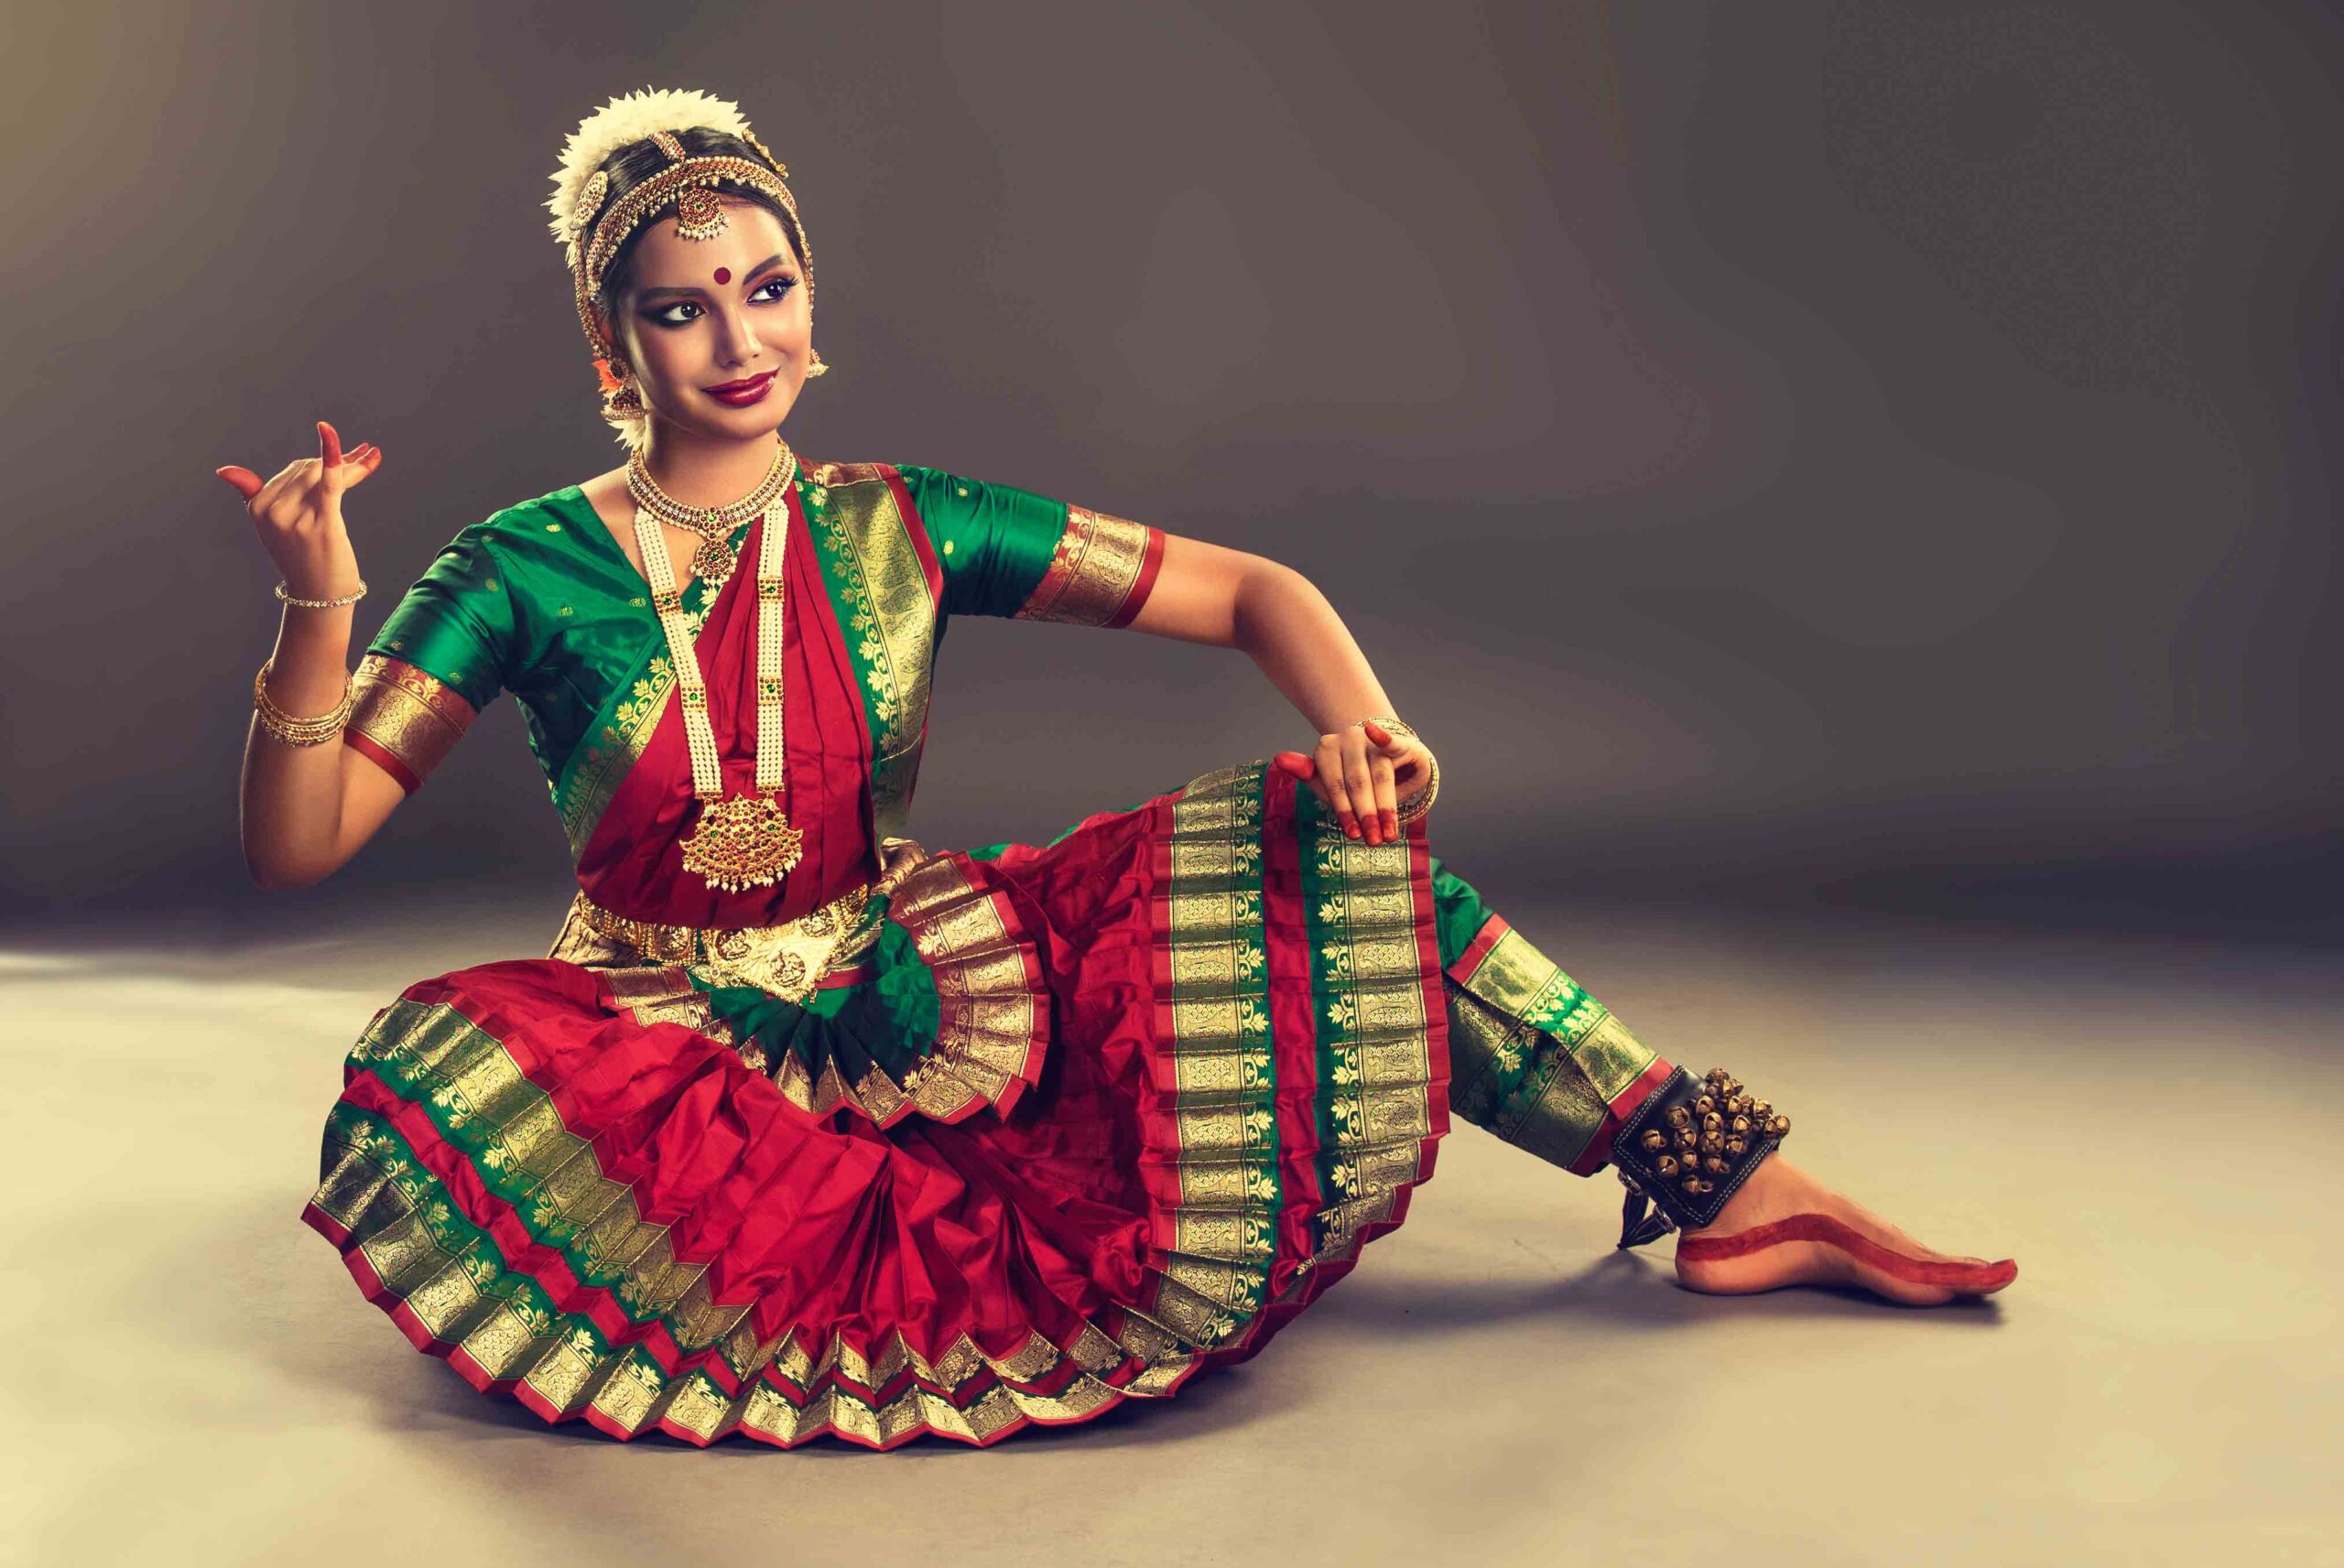 Which is the most difficult classical Indian dance form? - Quora